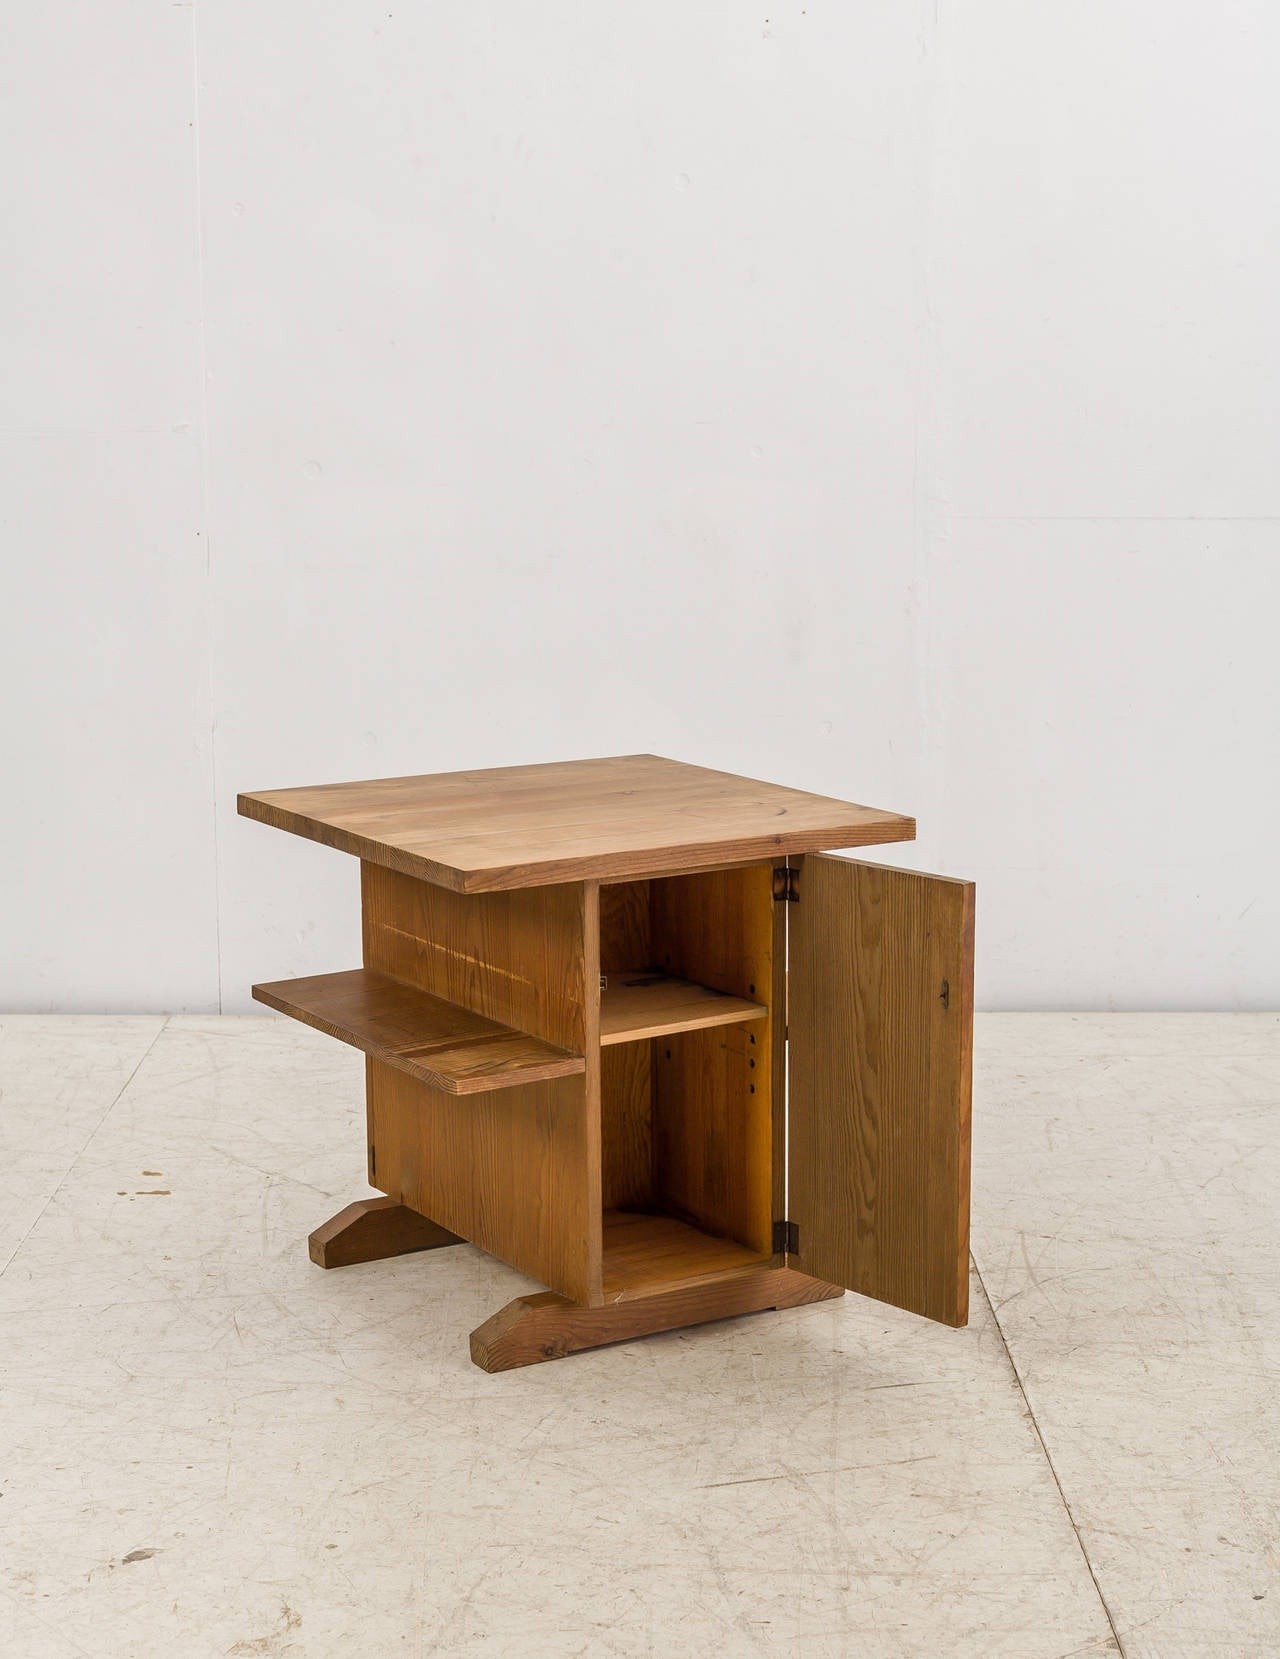 Small coffee table mini bar or bedside table in pine